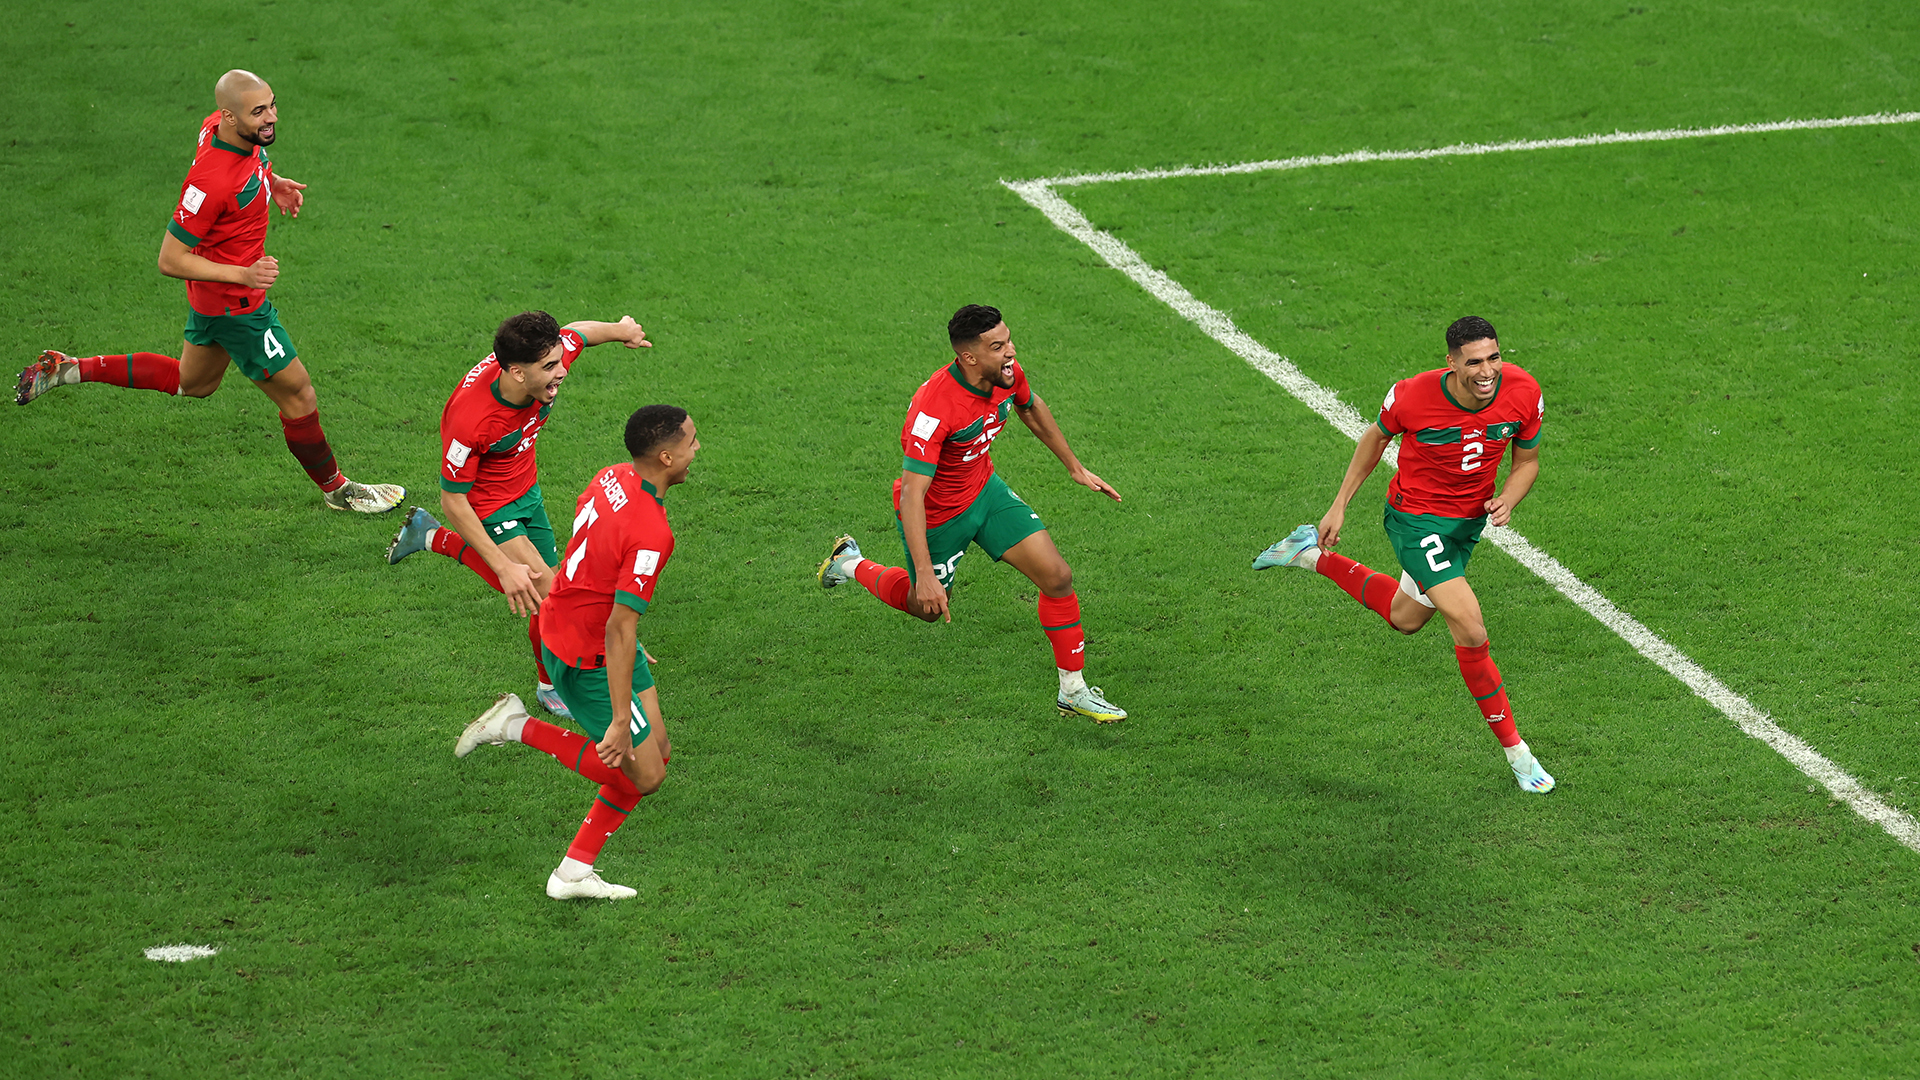 Achraf Hakimi of Morocco celebrates after the team's victory in the penalty shoot out during the FIFA World Cup Qatar 2022 Round of 16 match between Morocco and Spain at Education City Stadium on December 06, 2022 in Al Rayyan, Qatar.